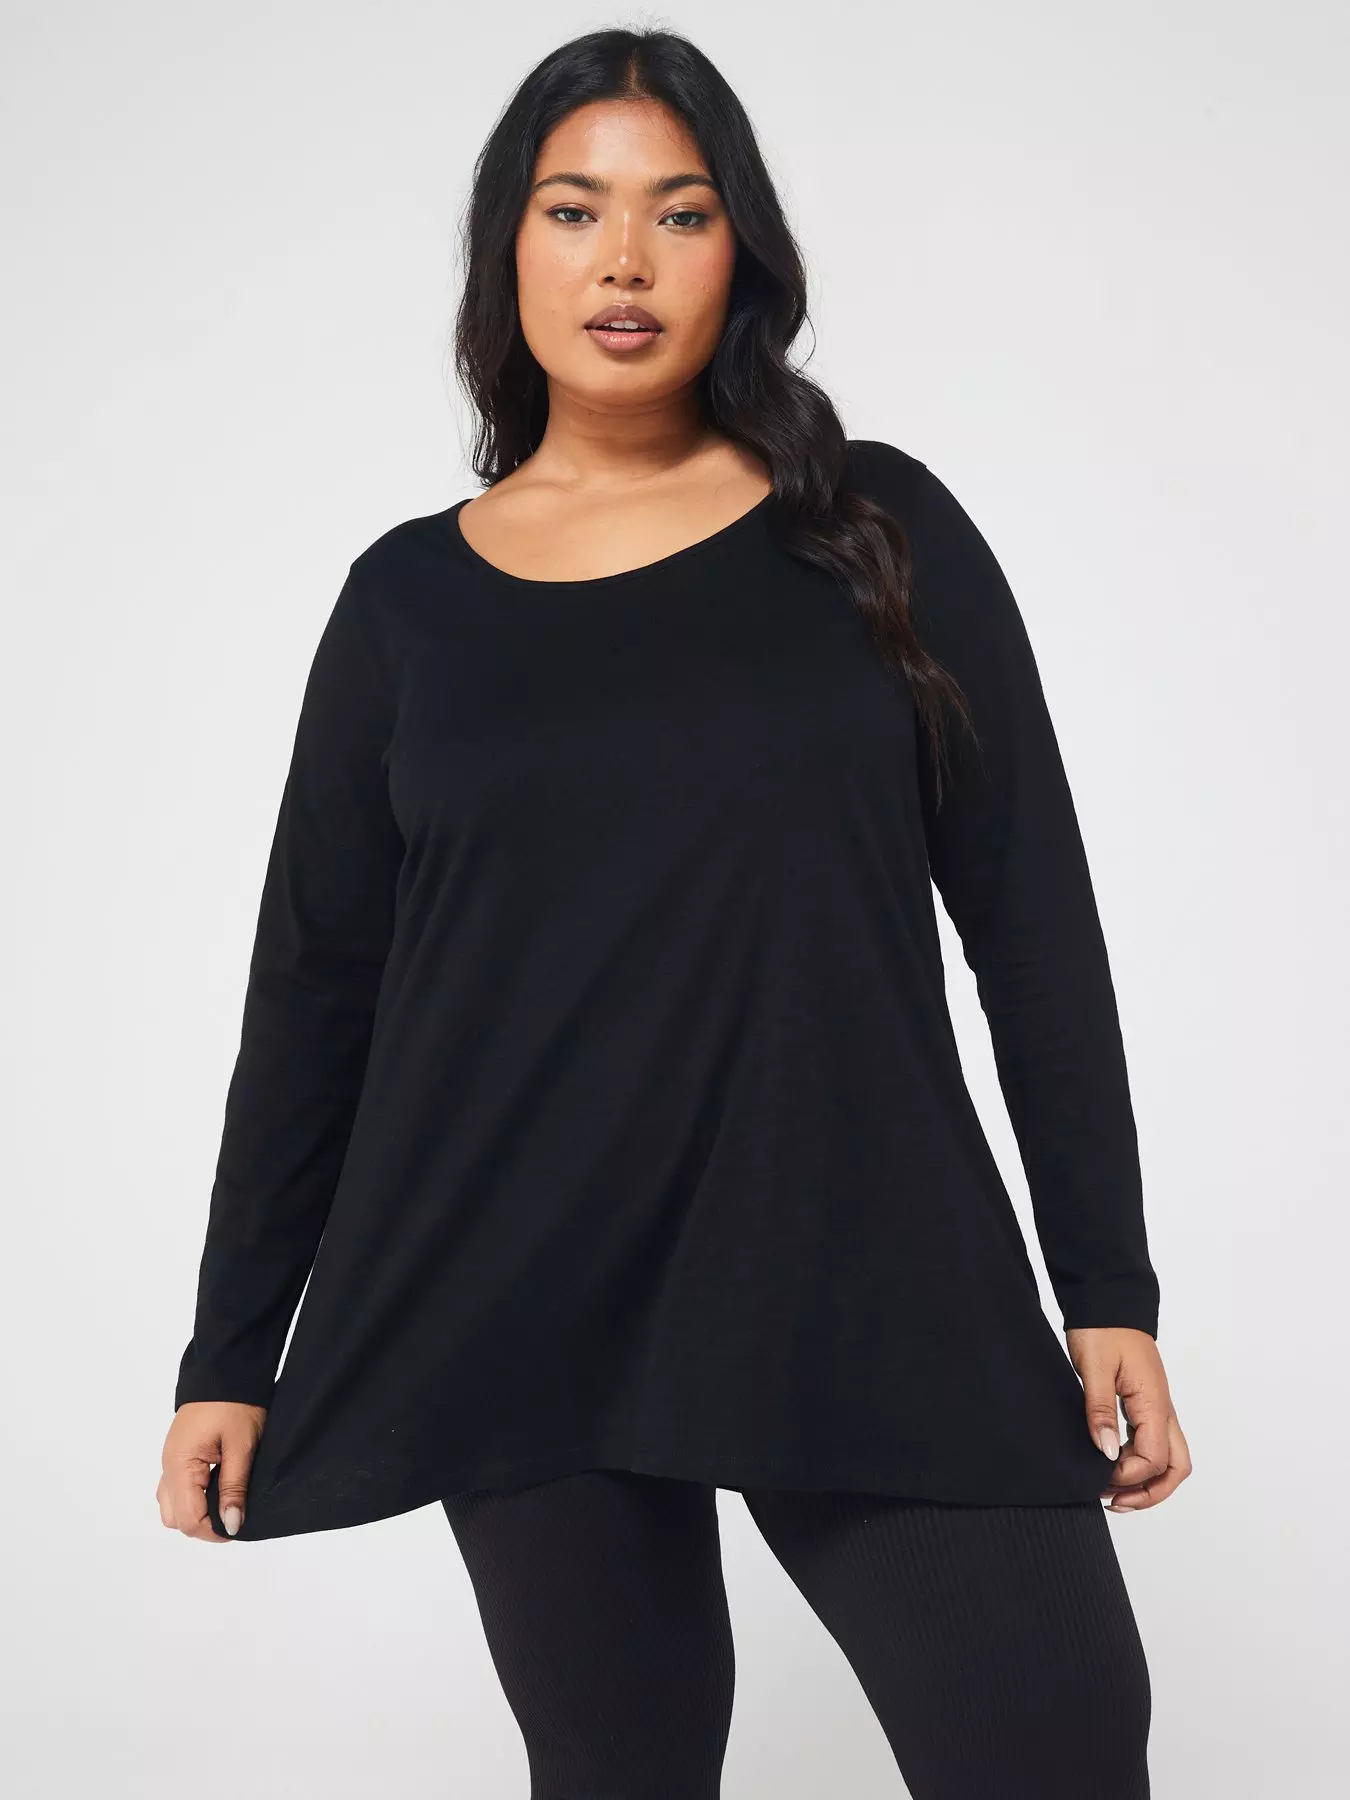 Where to find cute true to size plus size tees on